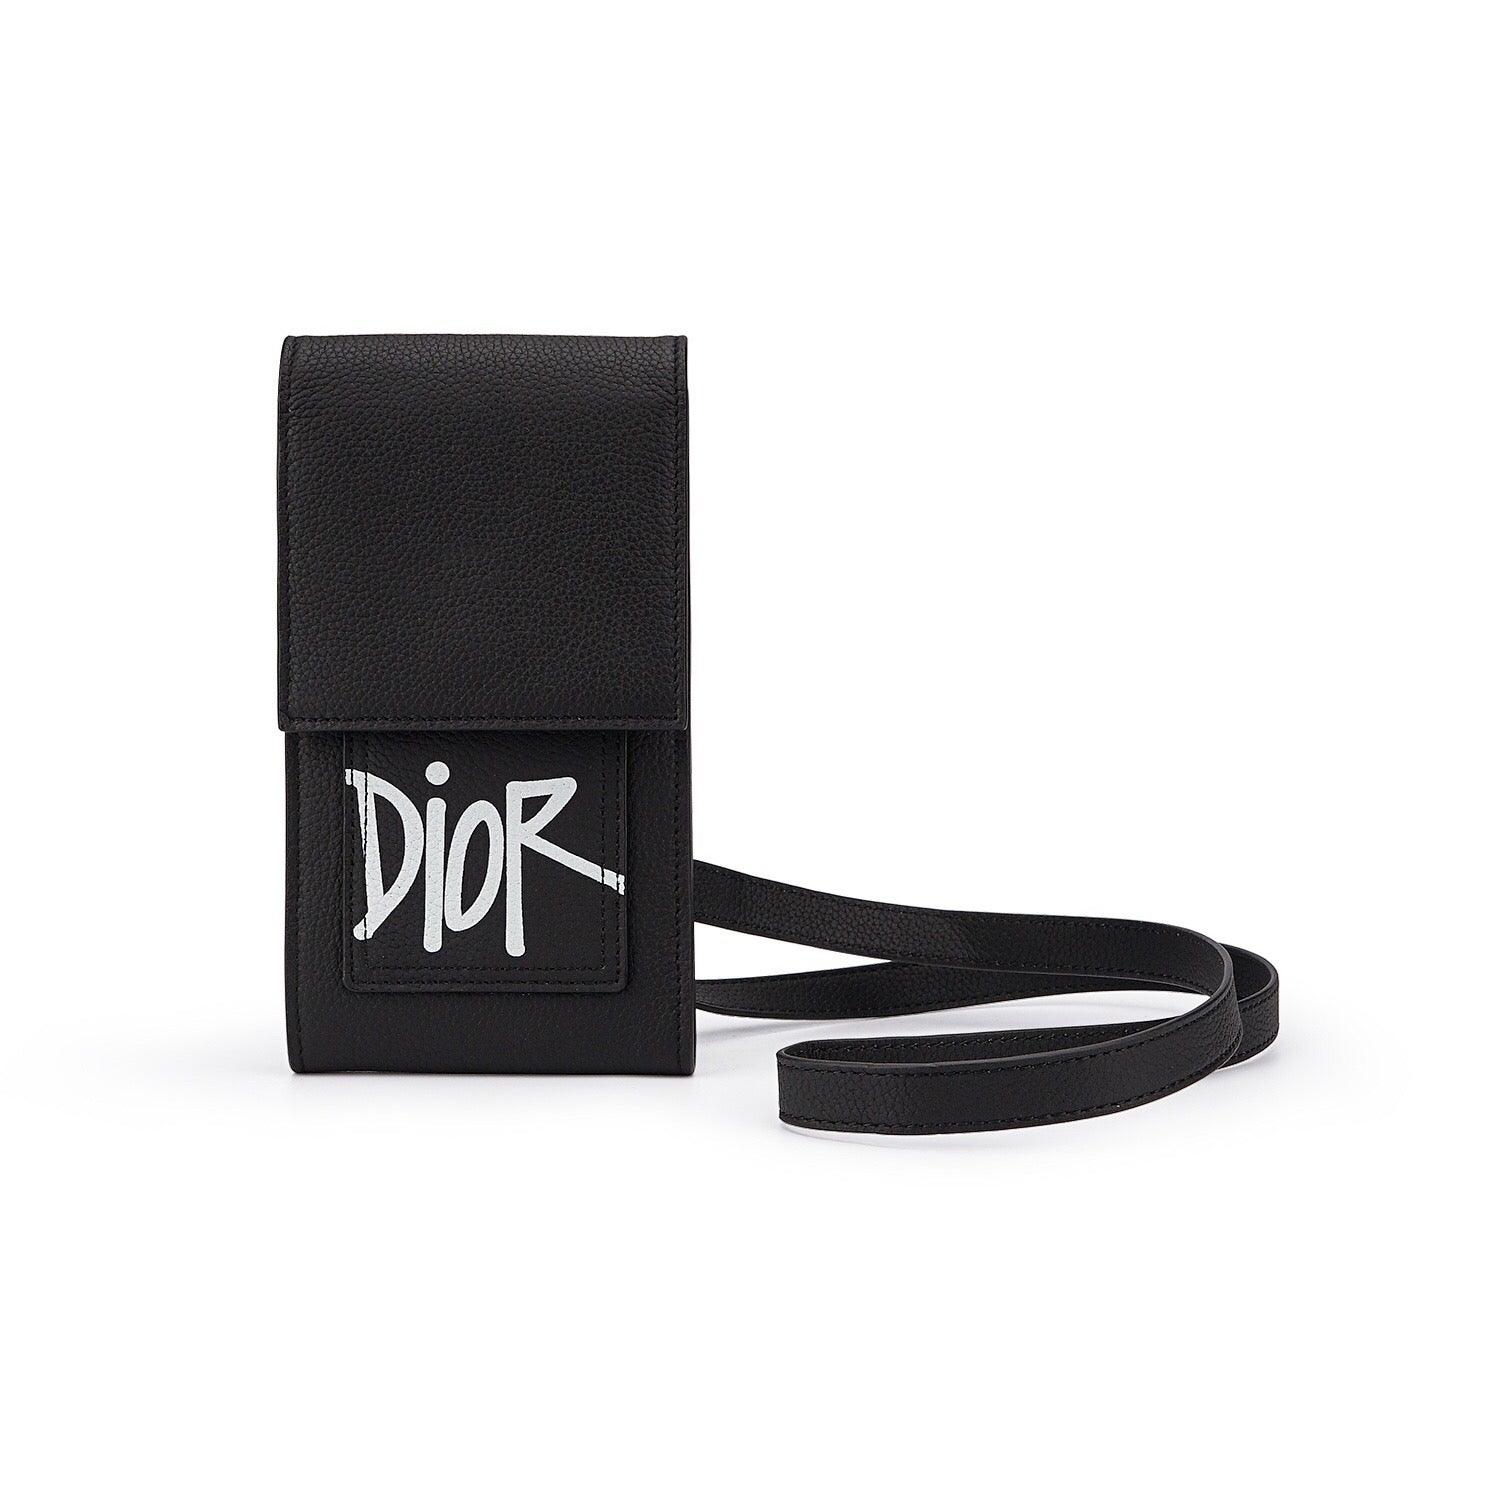 DIOR AND SHAW MINI POUCH BAG